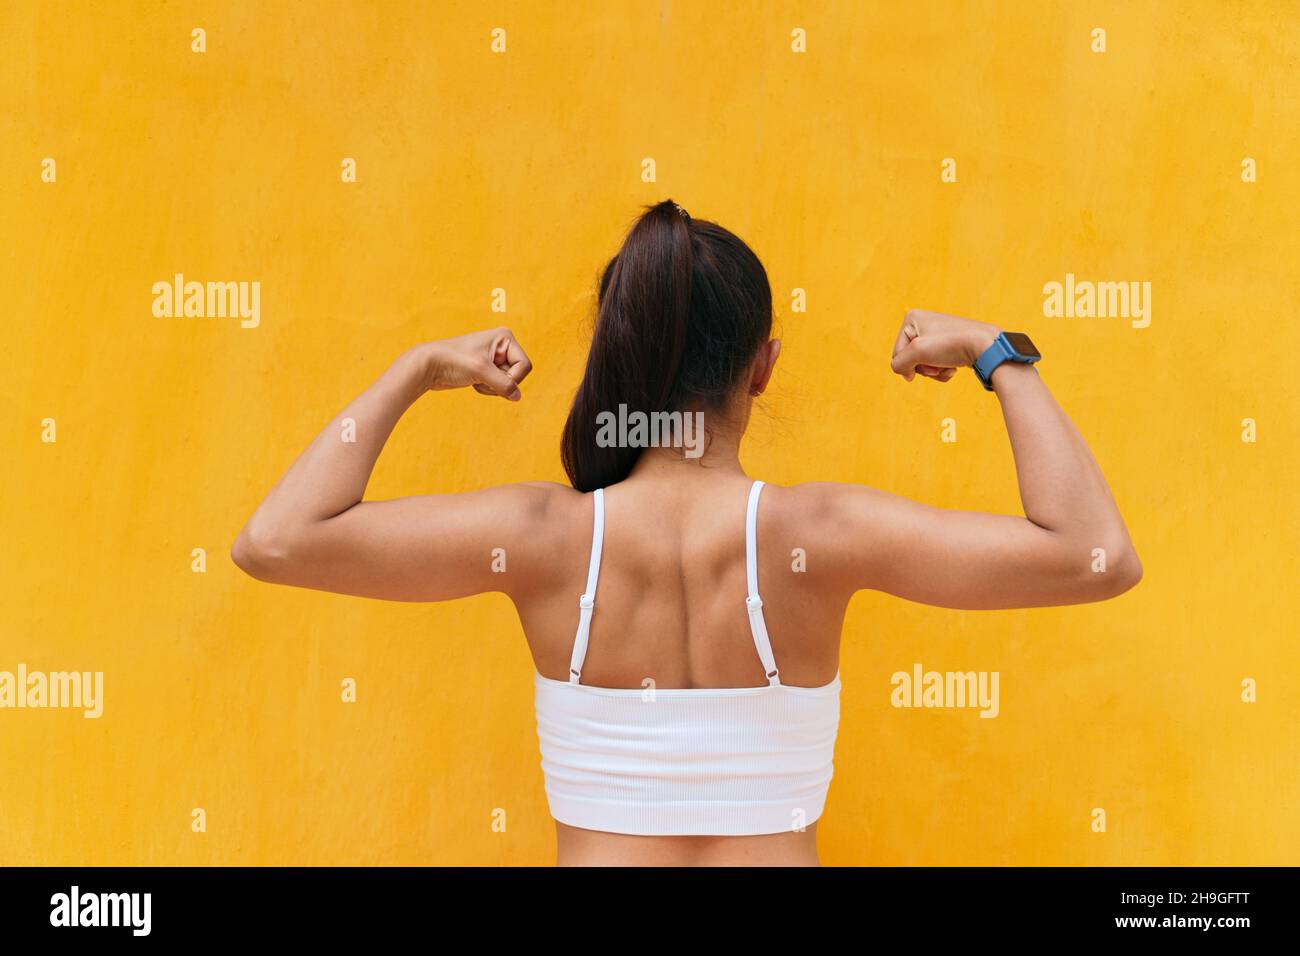 Mestizo woman flexing her muscles in the open air Stock Photo